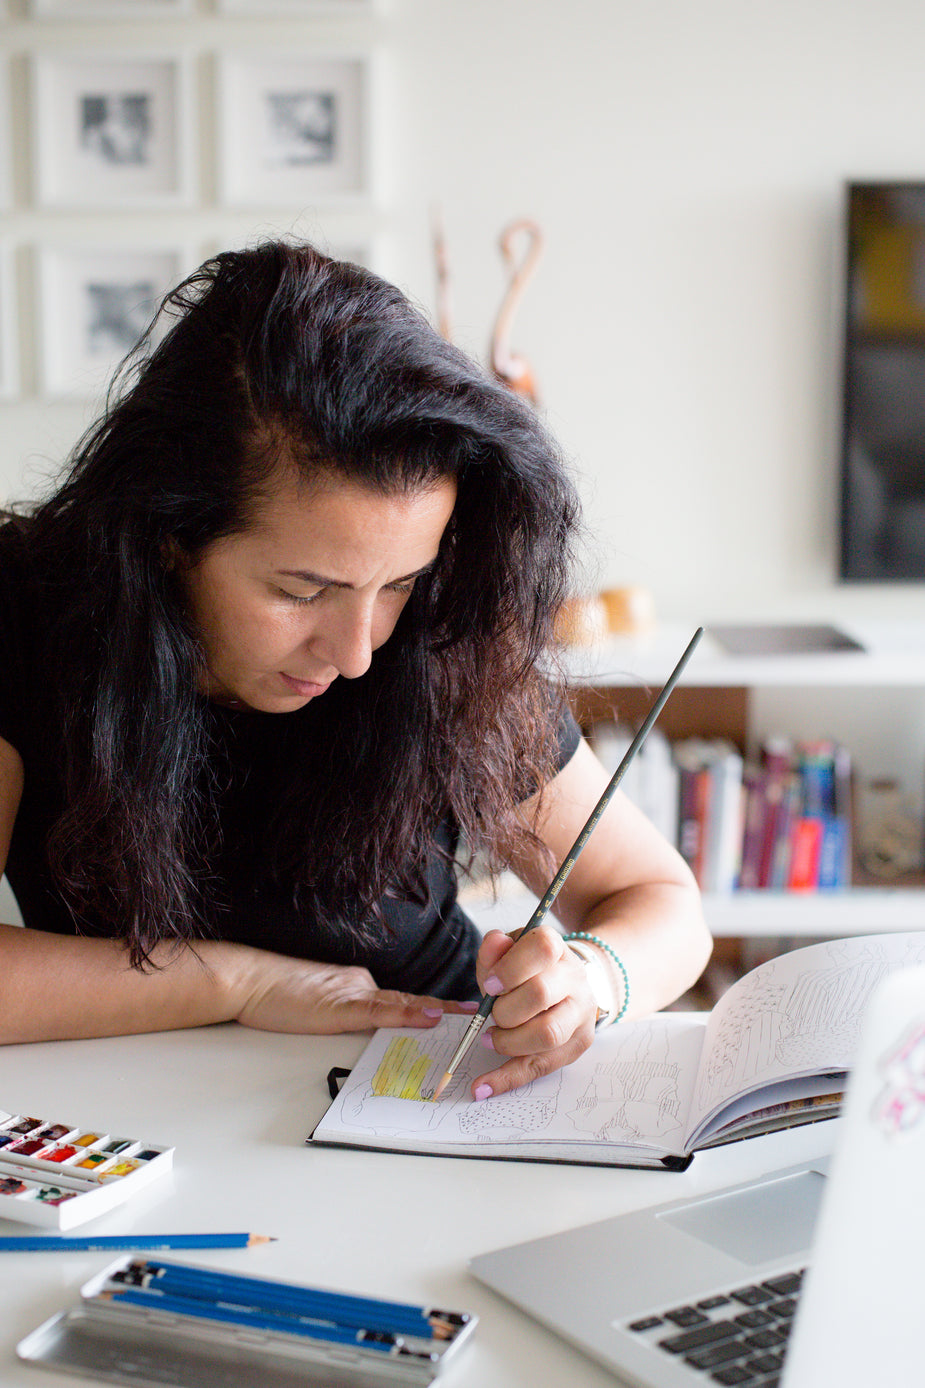 Browse Free HD Images of Person Carefully Paints In A Sketchbook